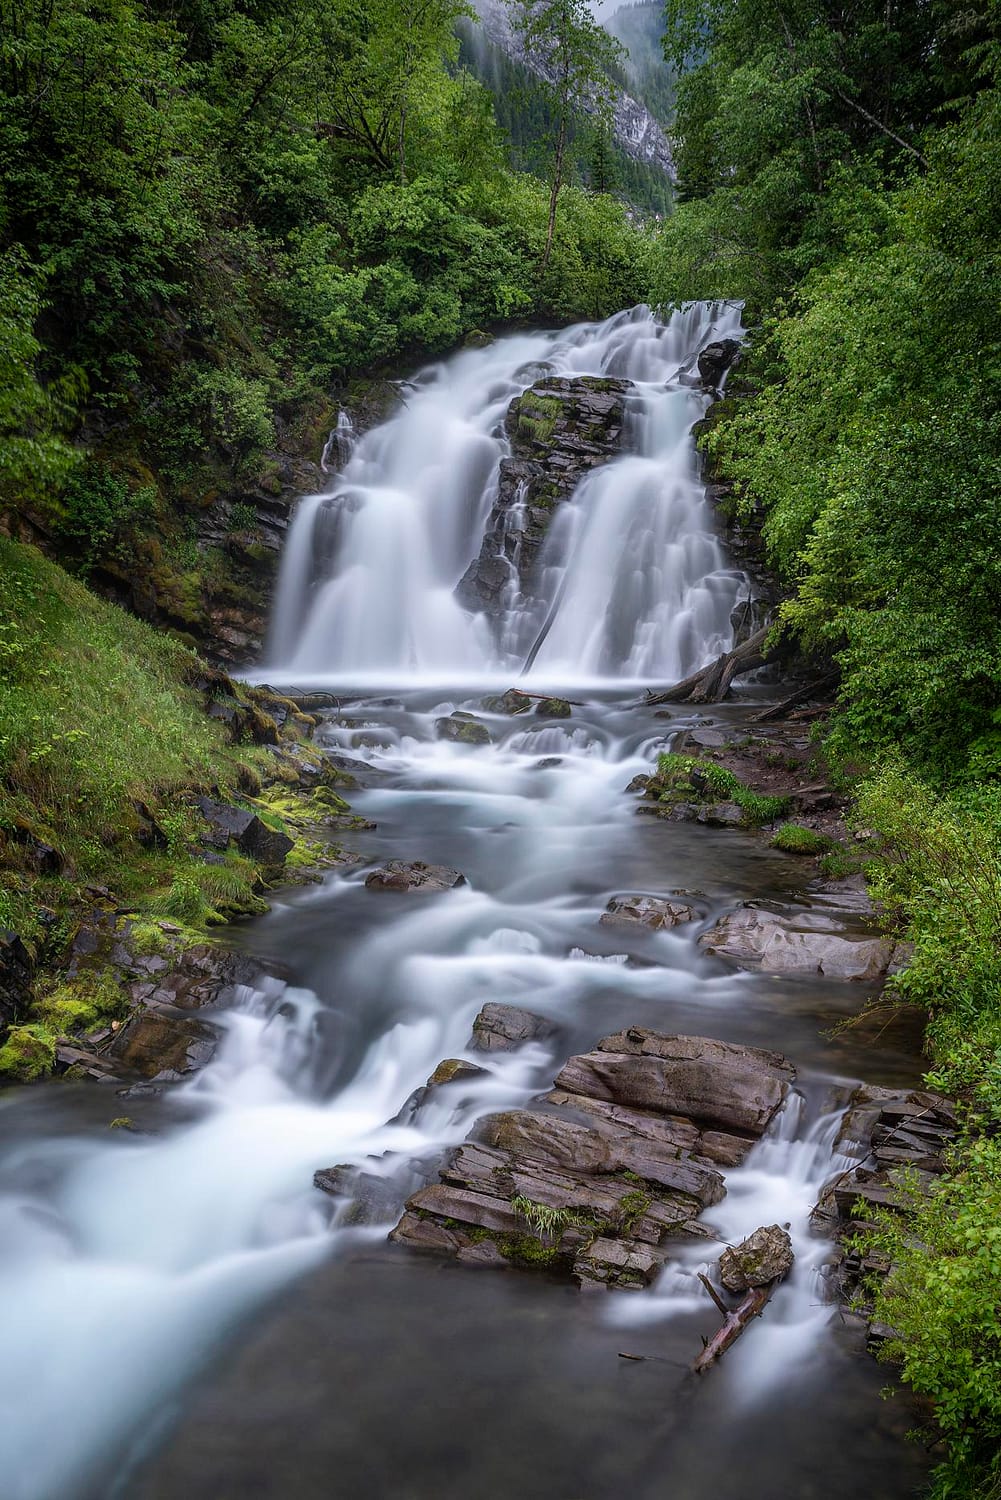 a large waterfall surrounded by lush green forest